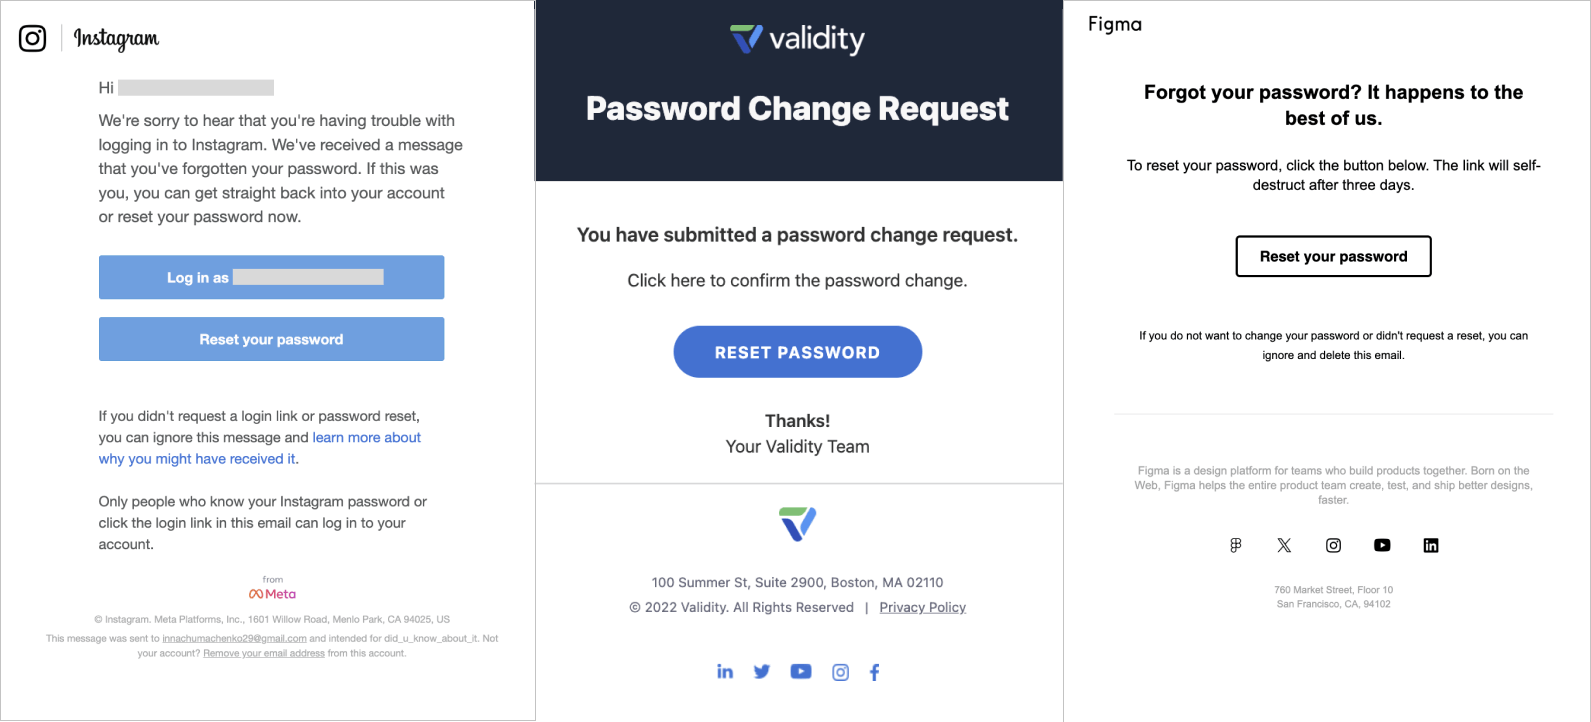 password-request-email-examples